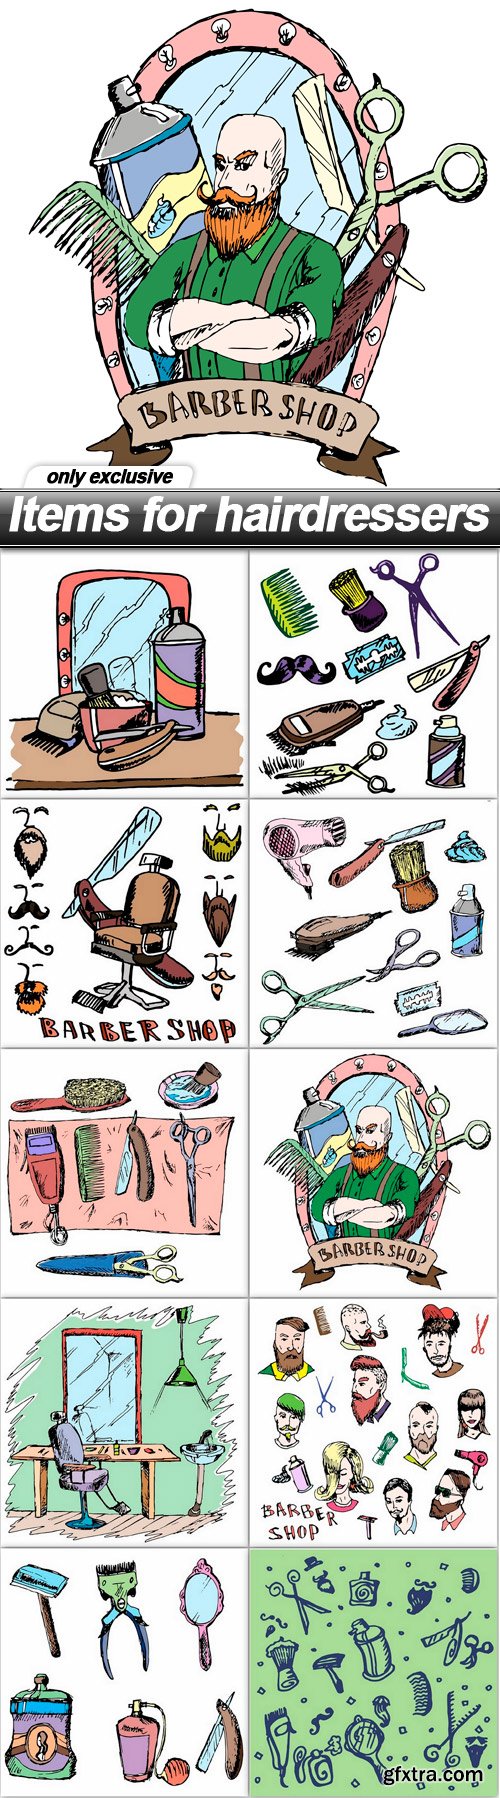 Items for hairdressers - 10 EPS